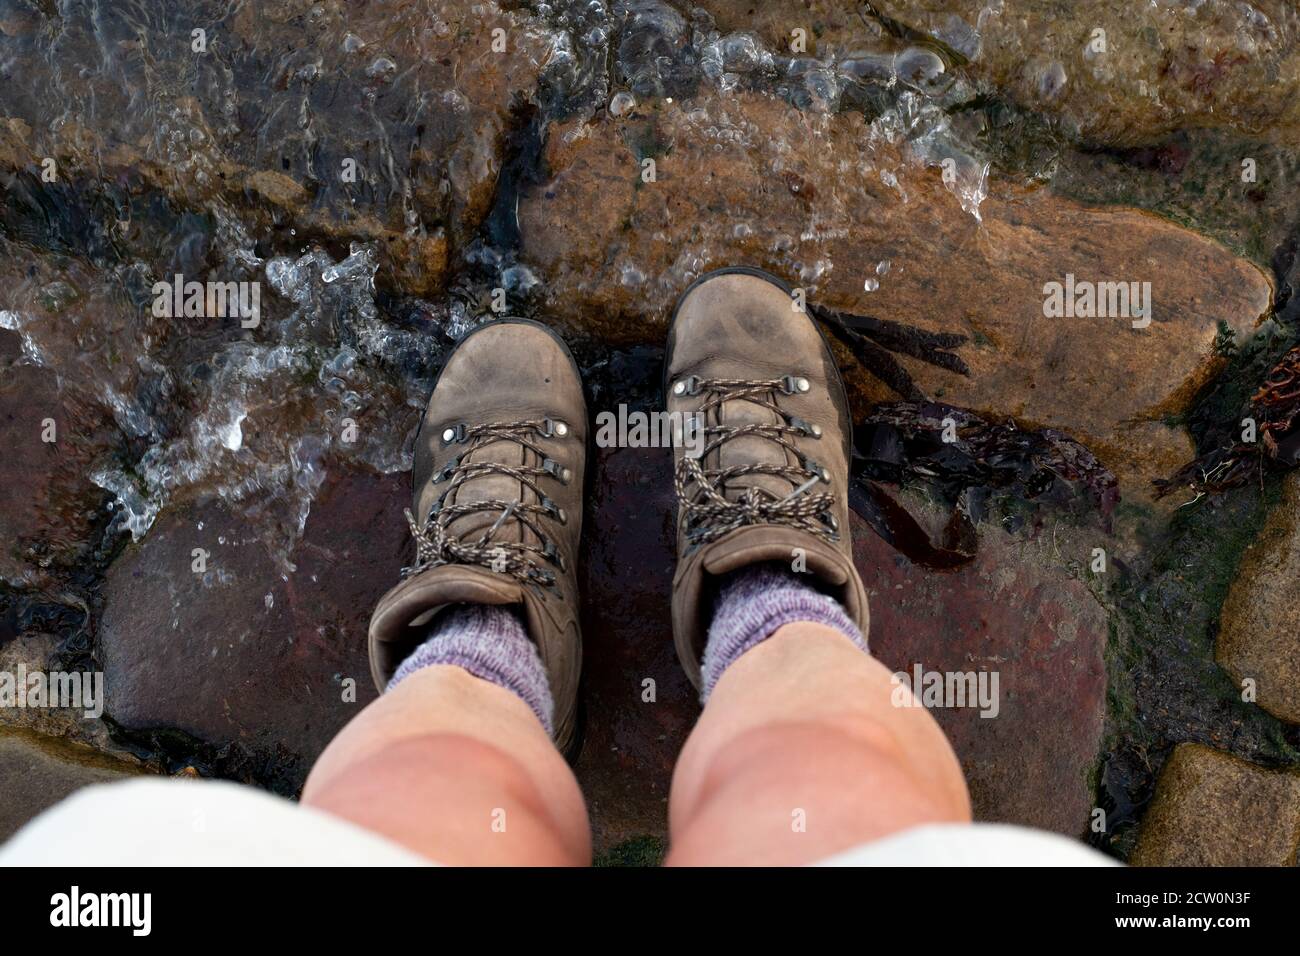 Coast to coast walk, UK - customary dipping walking boots in the North sea at the end of the walk, Robin Hoods Bay, North Yorkshire, England, UK Stock Photo